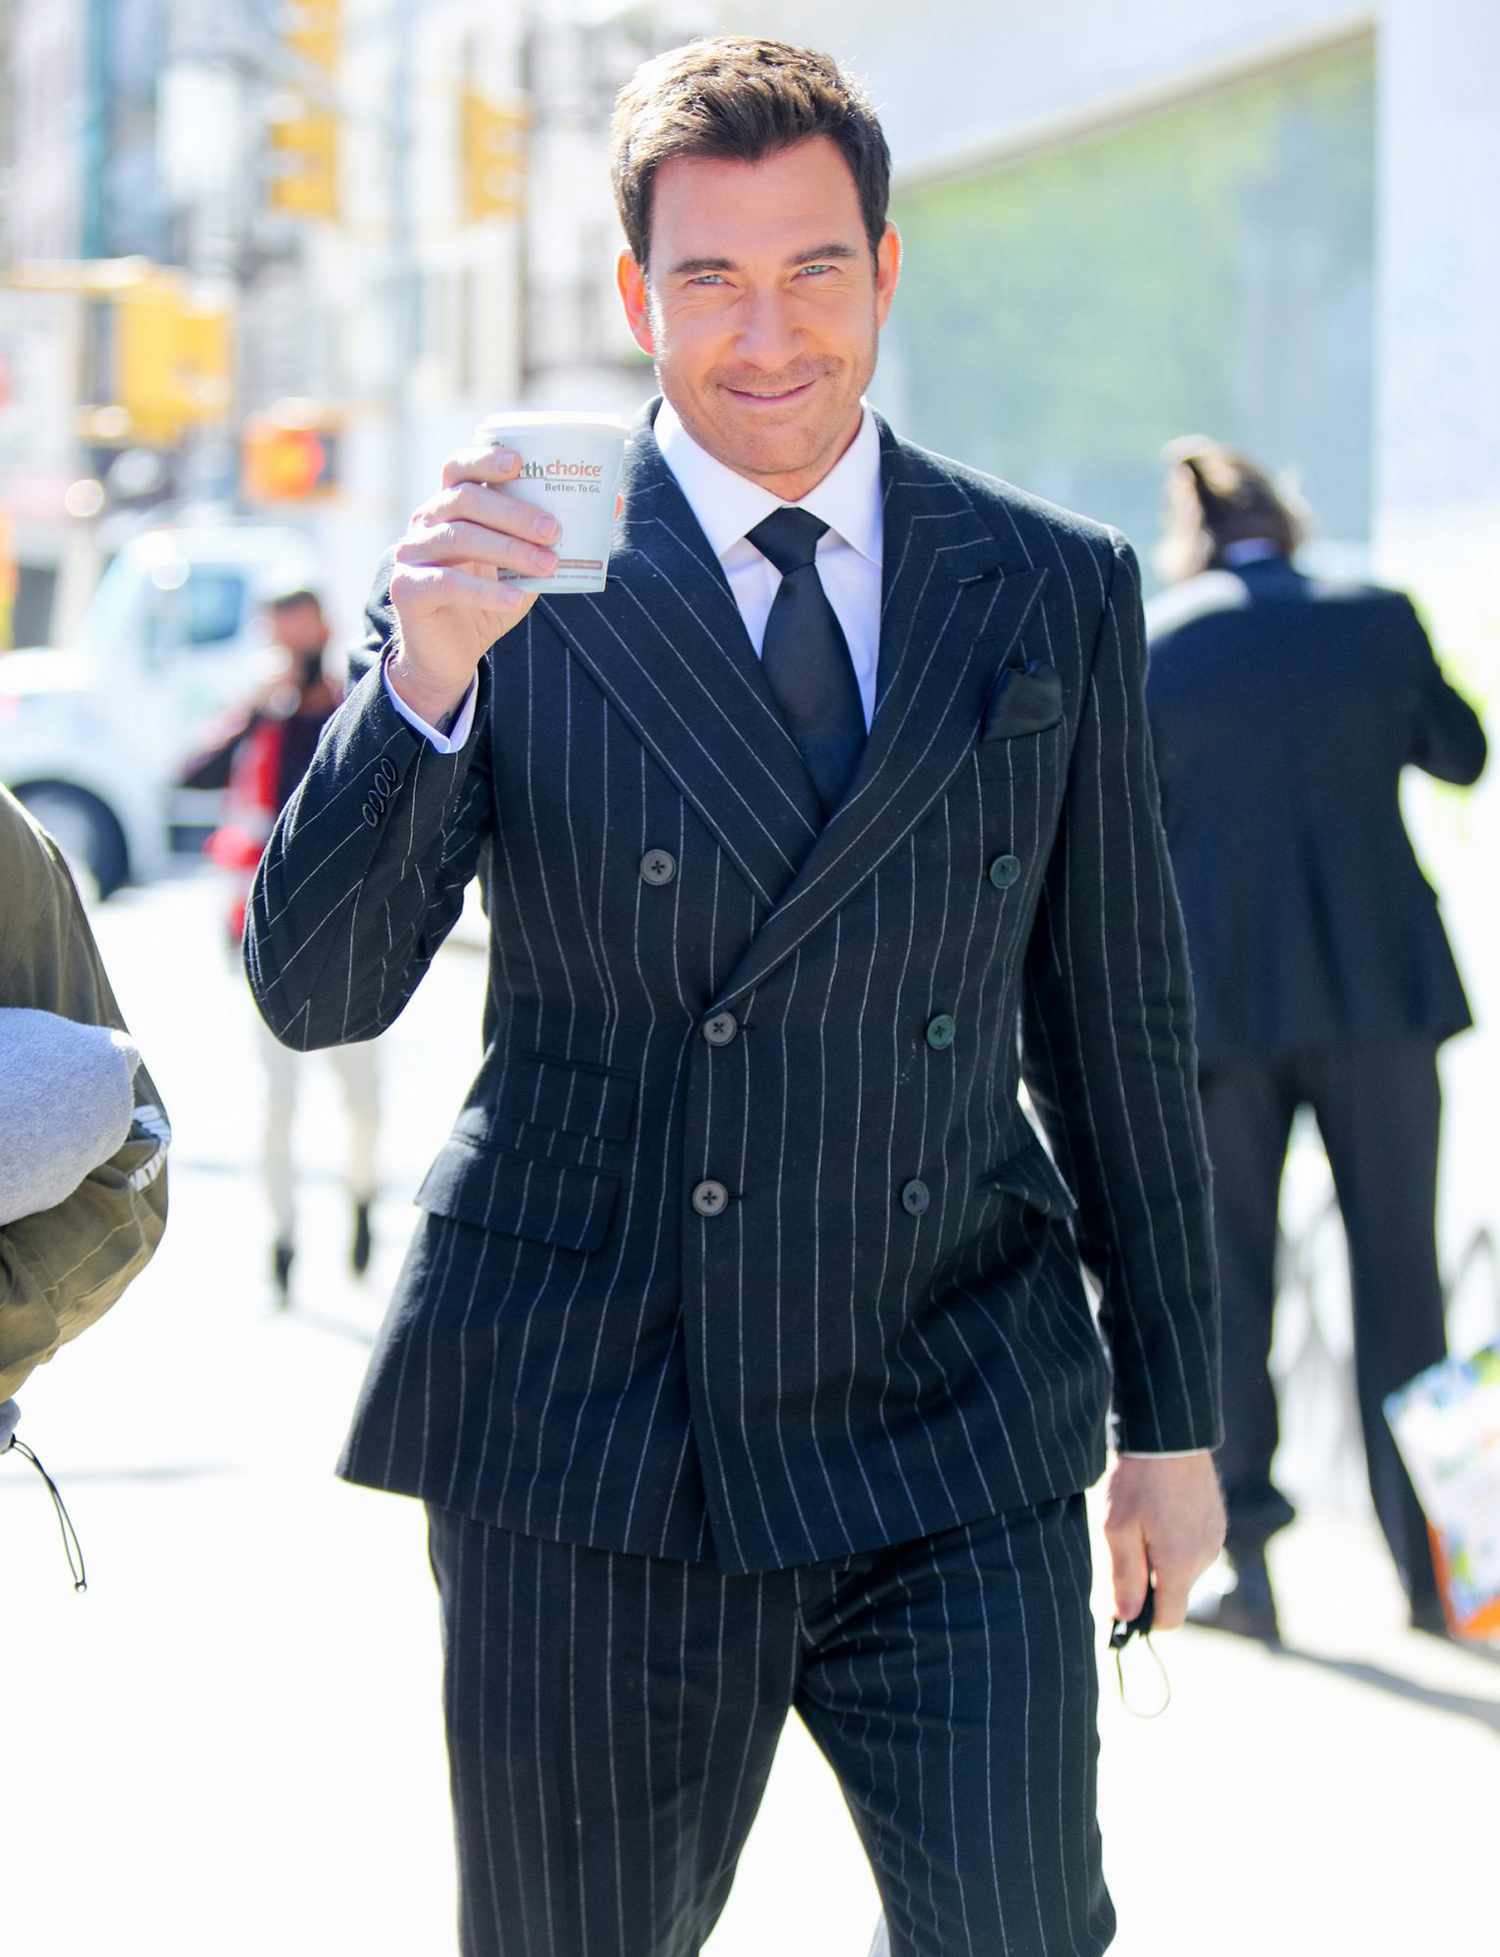 Dylan McDermott is seen at the film set of the "Law and Order: Organized Crime" on May 11, 2021 in New York City